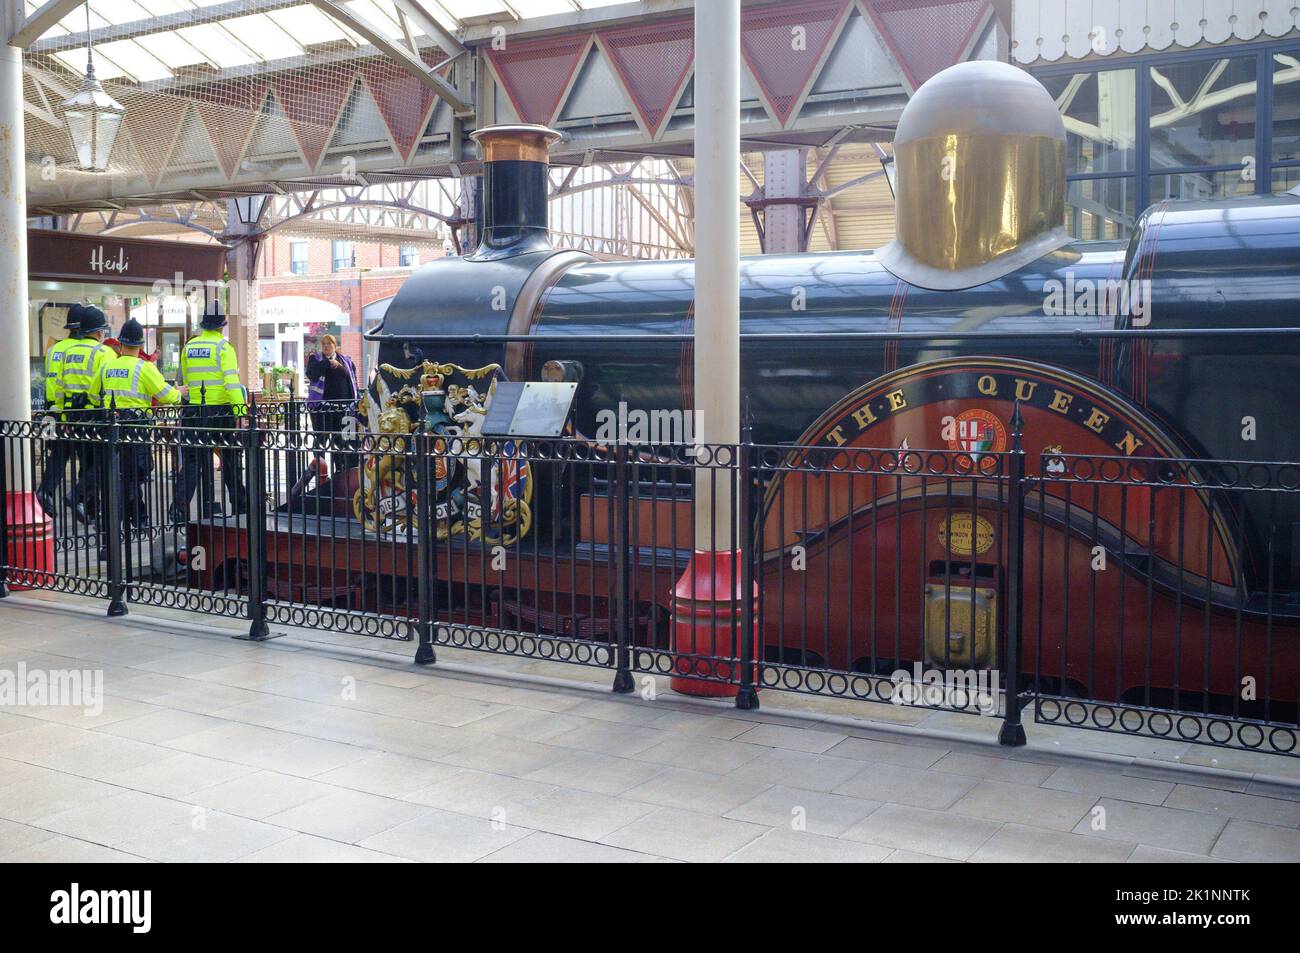 The old LNER steam engine train 'The Queen' on display at Windsor railway station on the day of HM Queen Elizabeth II funeral. Stock Photo